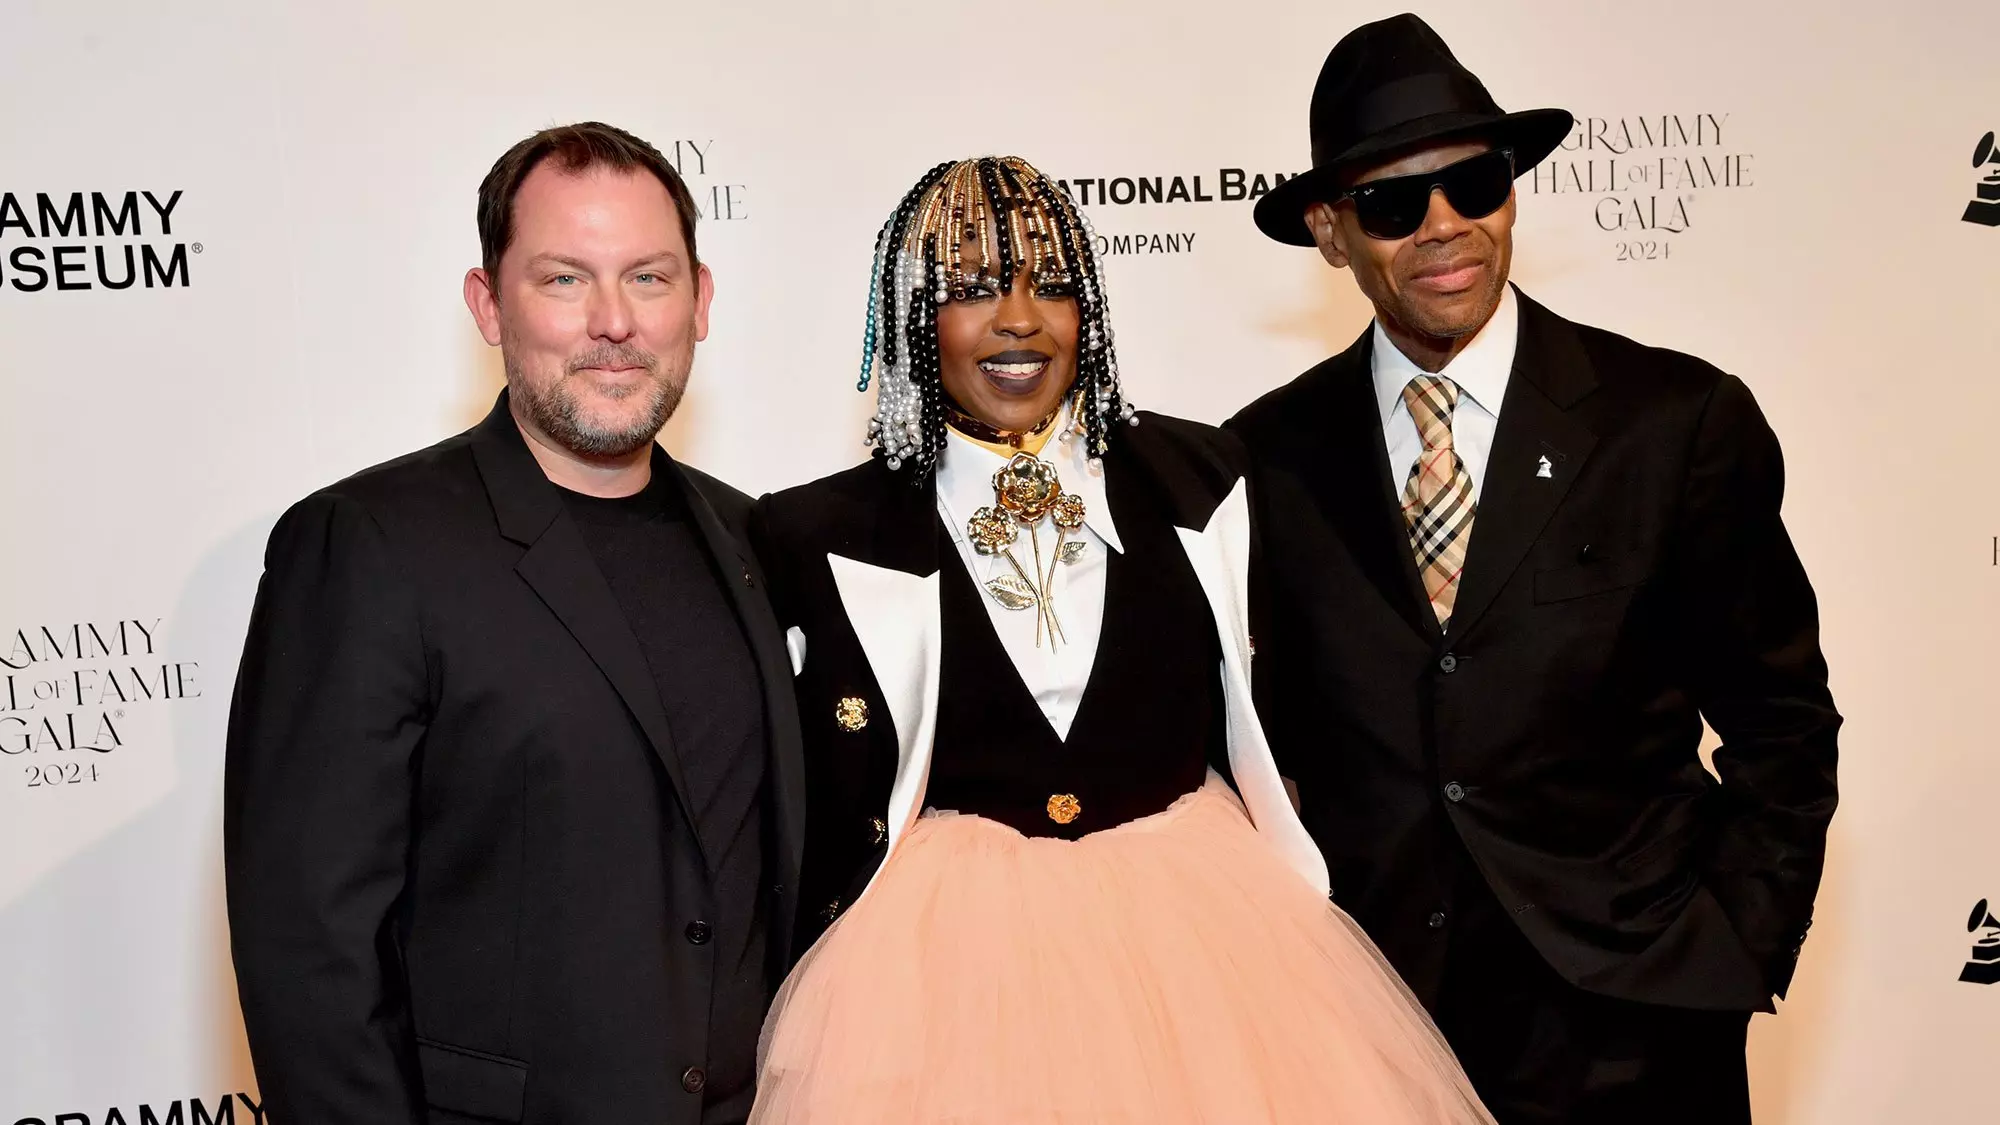 6 Key Highlights From The Inaugural GRAMMY Hall of Fame Gala Honoring Lauryn Hill, Donna Summer, Atlantic Records & Many More